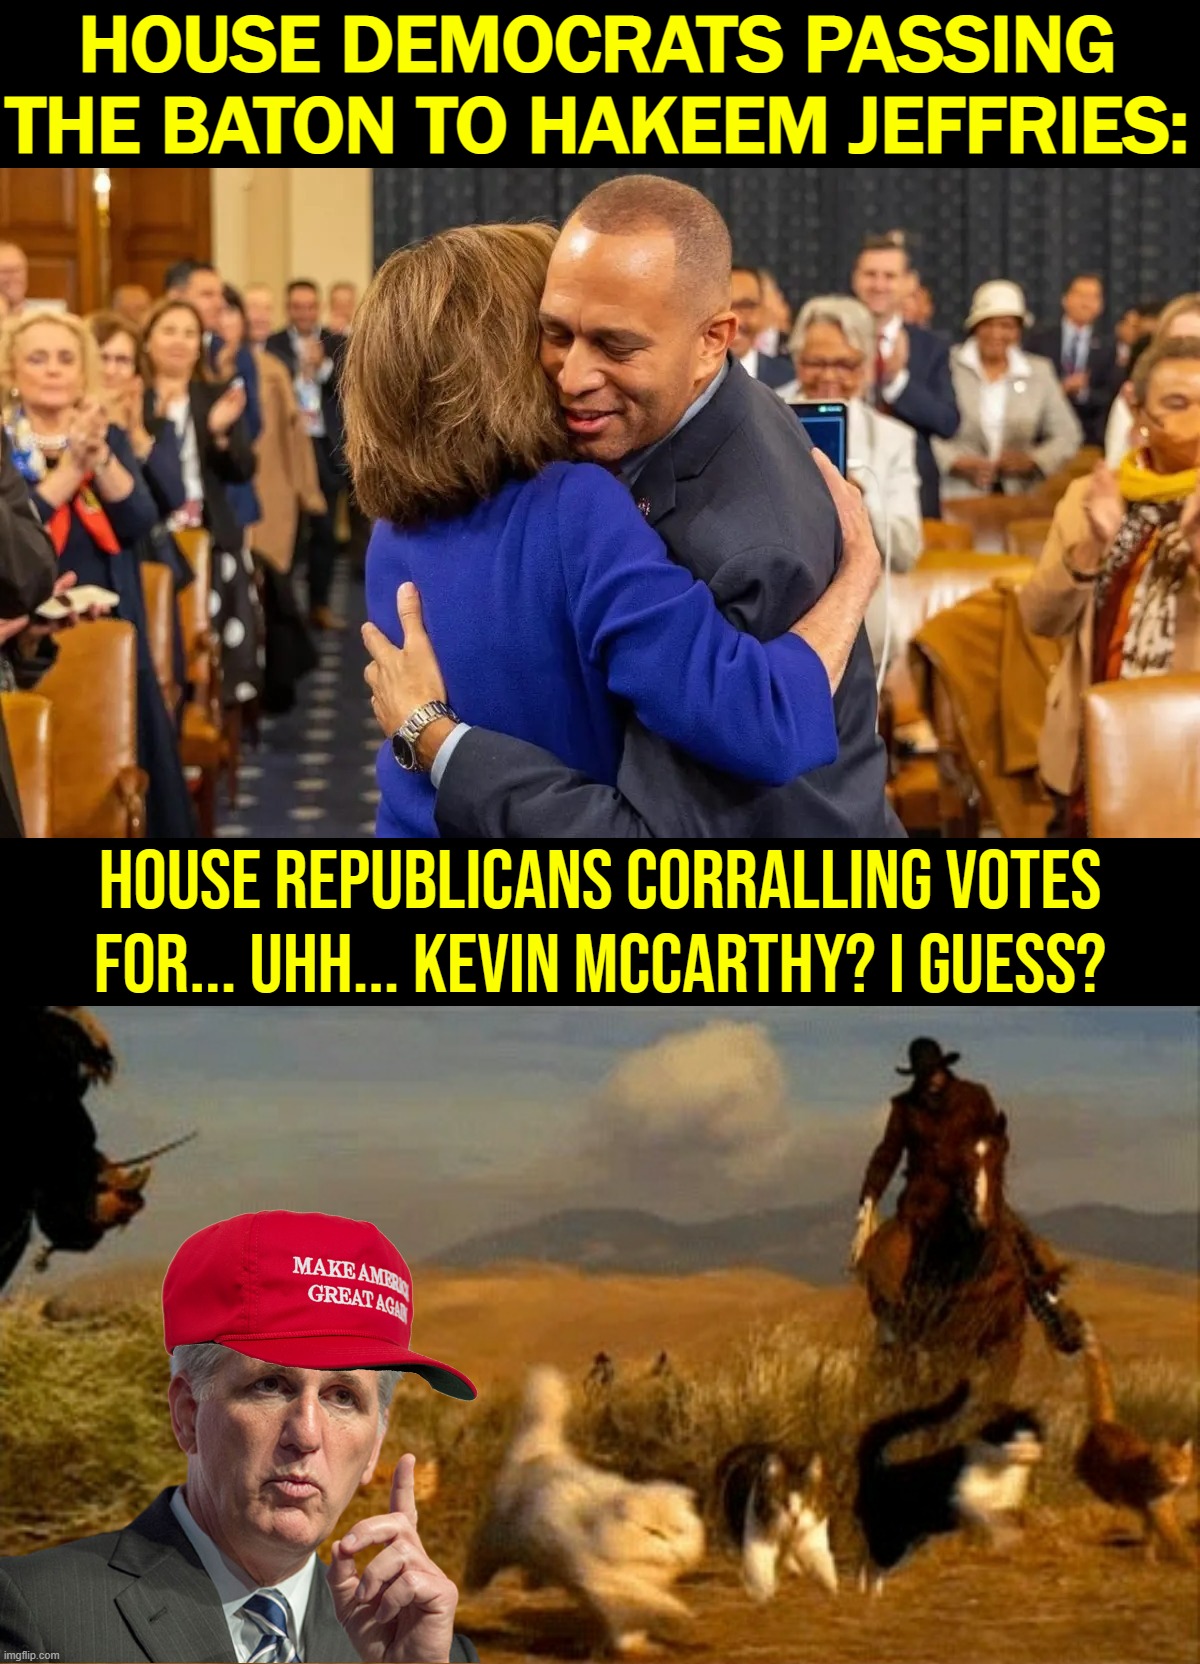 At the opening of Congress, Hakeem Jeffries was elected Minority Leader unanimously. Meanwhile in MAGAland... | HOUSE DEMOCRATS PASSING THE BATON TO HAKEEM JEFFRIES:; House Republicans corralling votes for... uhh... Kevin McCarthy? I guess? | image tagged in hakeem jeffries and nancy pelosi,herding cats | made w/ Imgflip meme maker